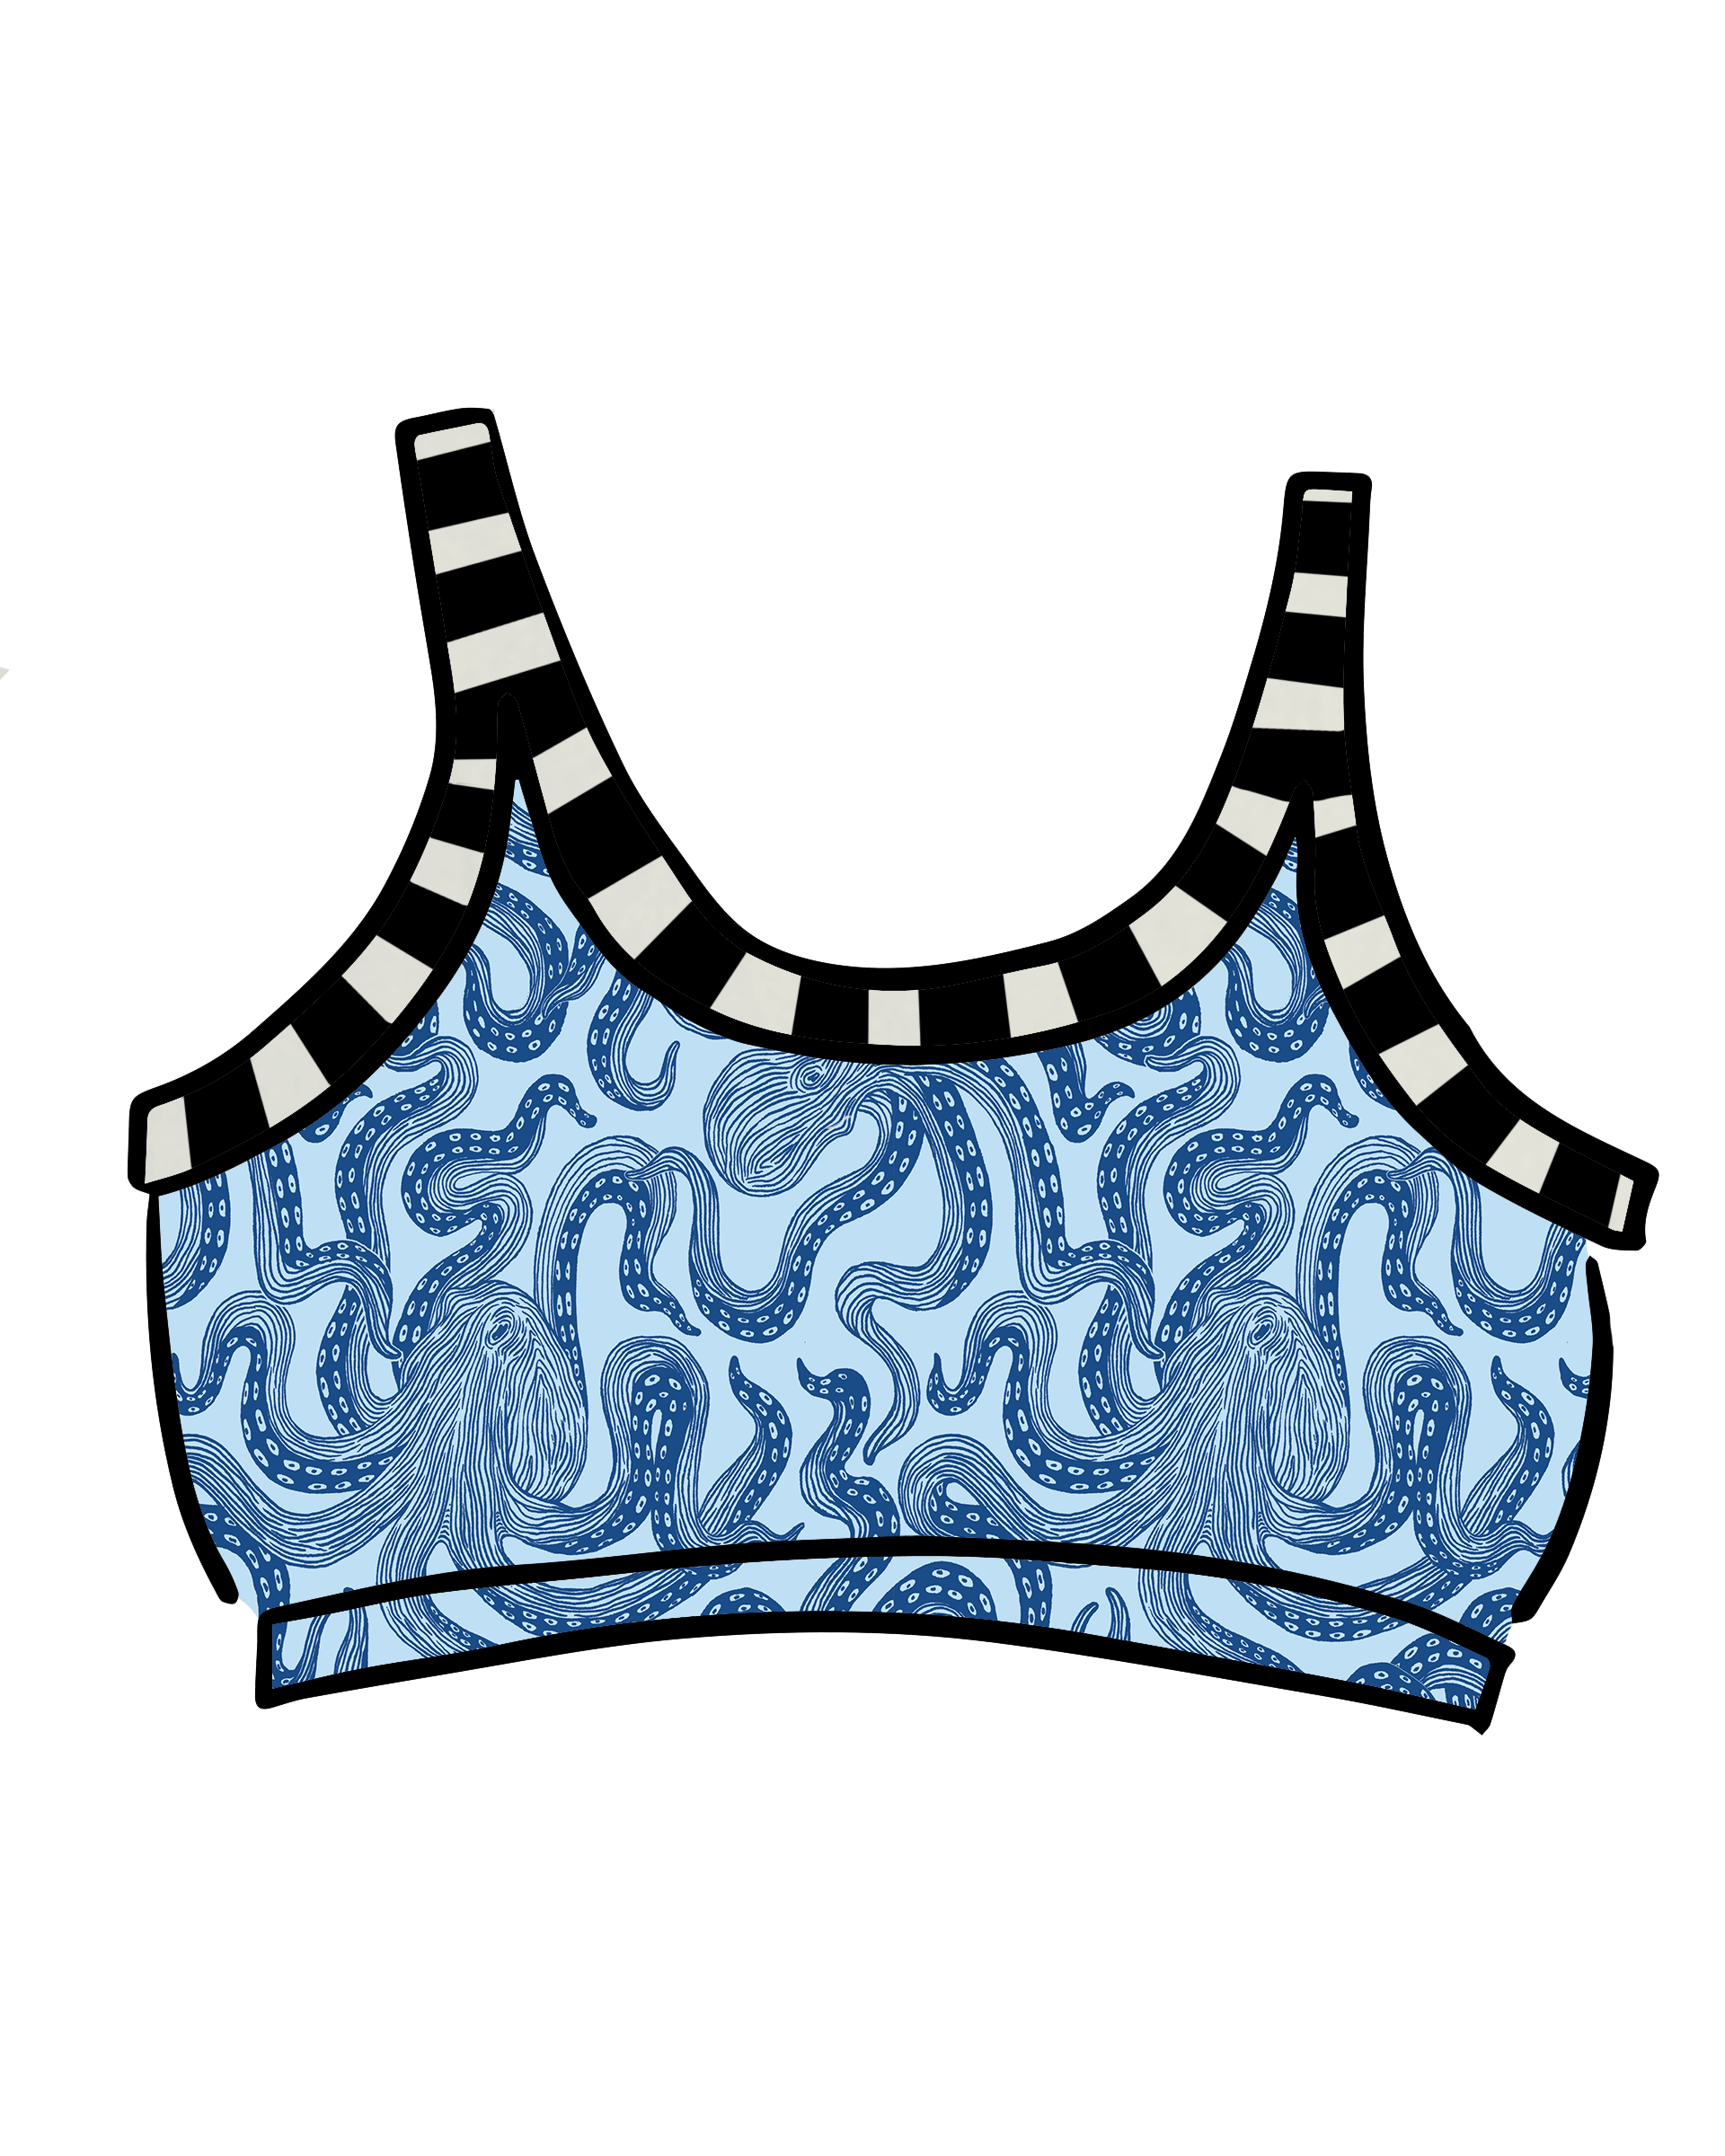 Drawing of Thunderpants Longline Bra in Octopants print - light blue with dark blue octopuses.